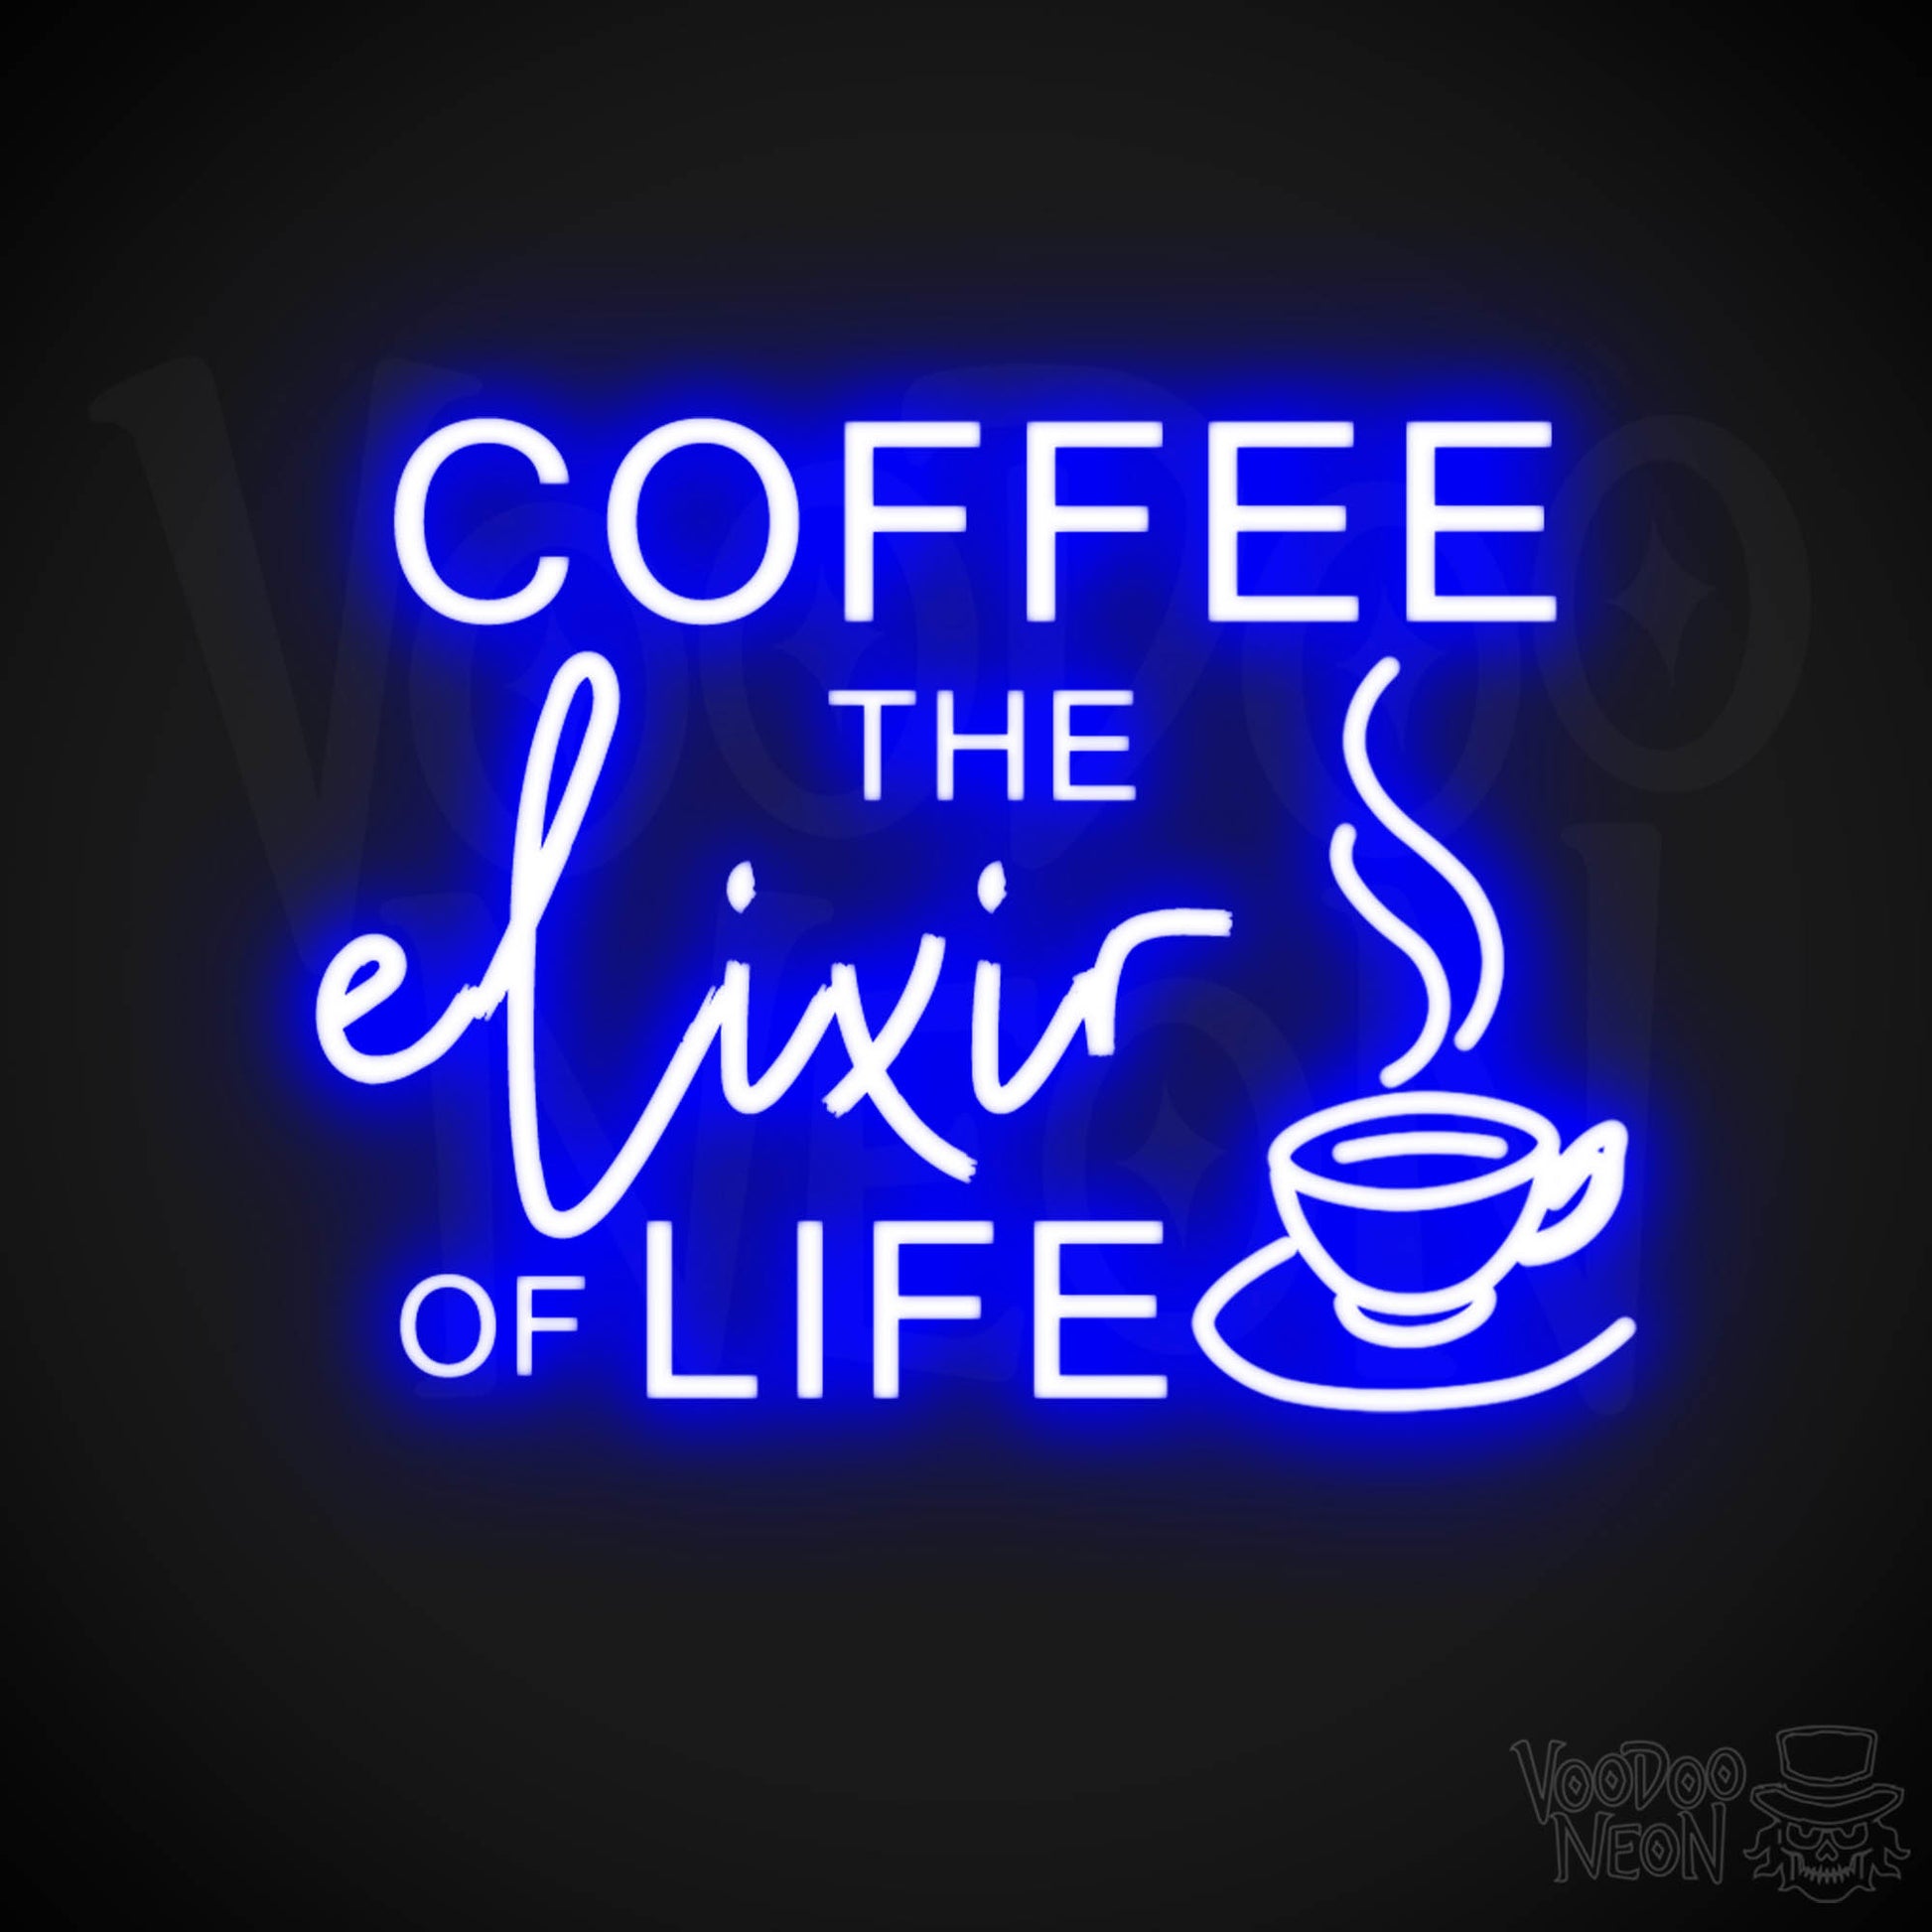 Coffee - The Elixir Of Life Neon Sign - The Elixir Of Life Sign - Color Dark Blue